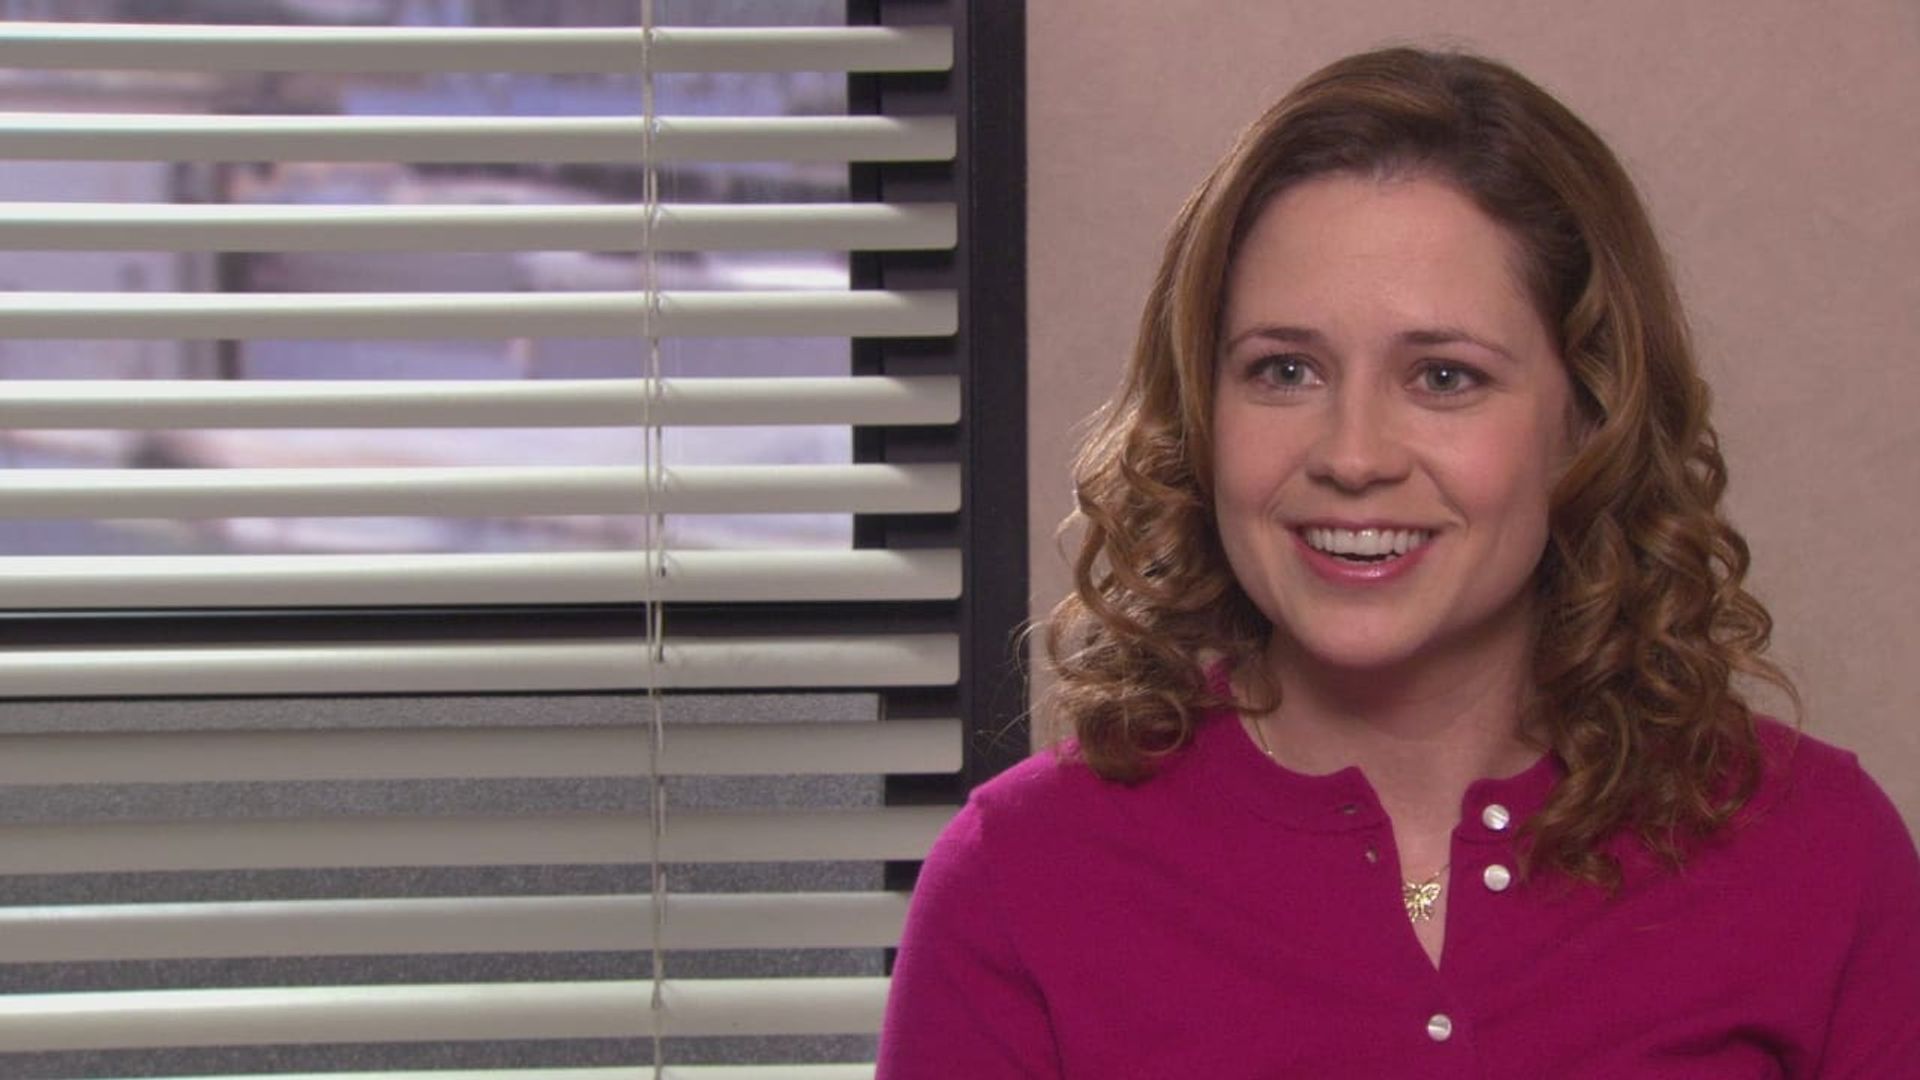 The Office background